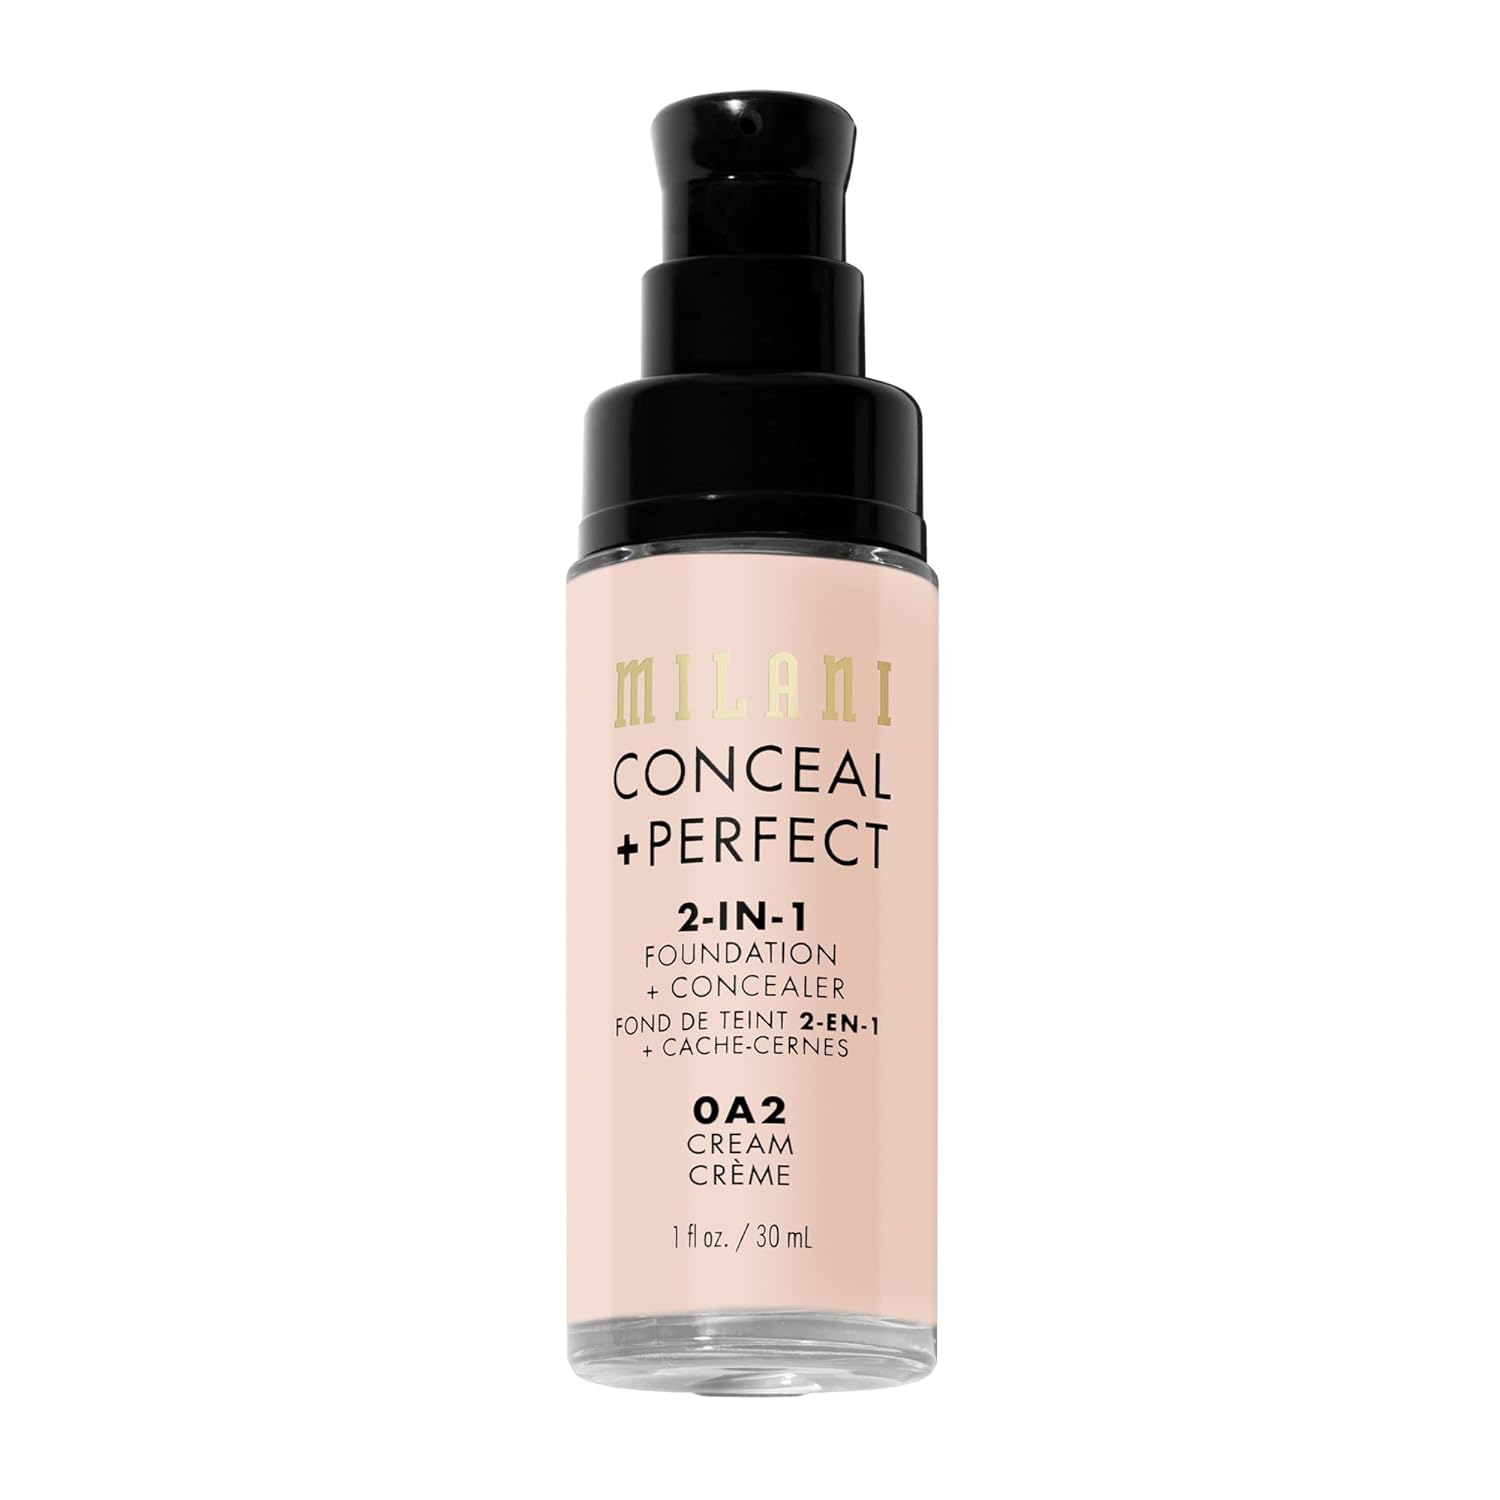 Milani Conceal + Perfect 2-in-1 Foundation + Concealer - Cre